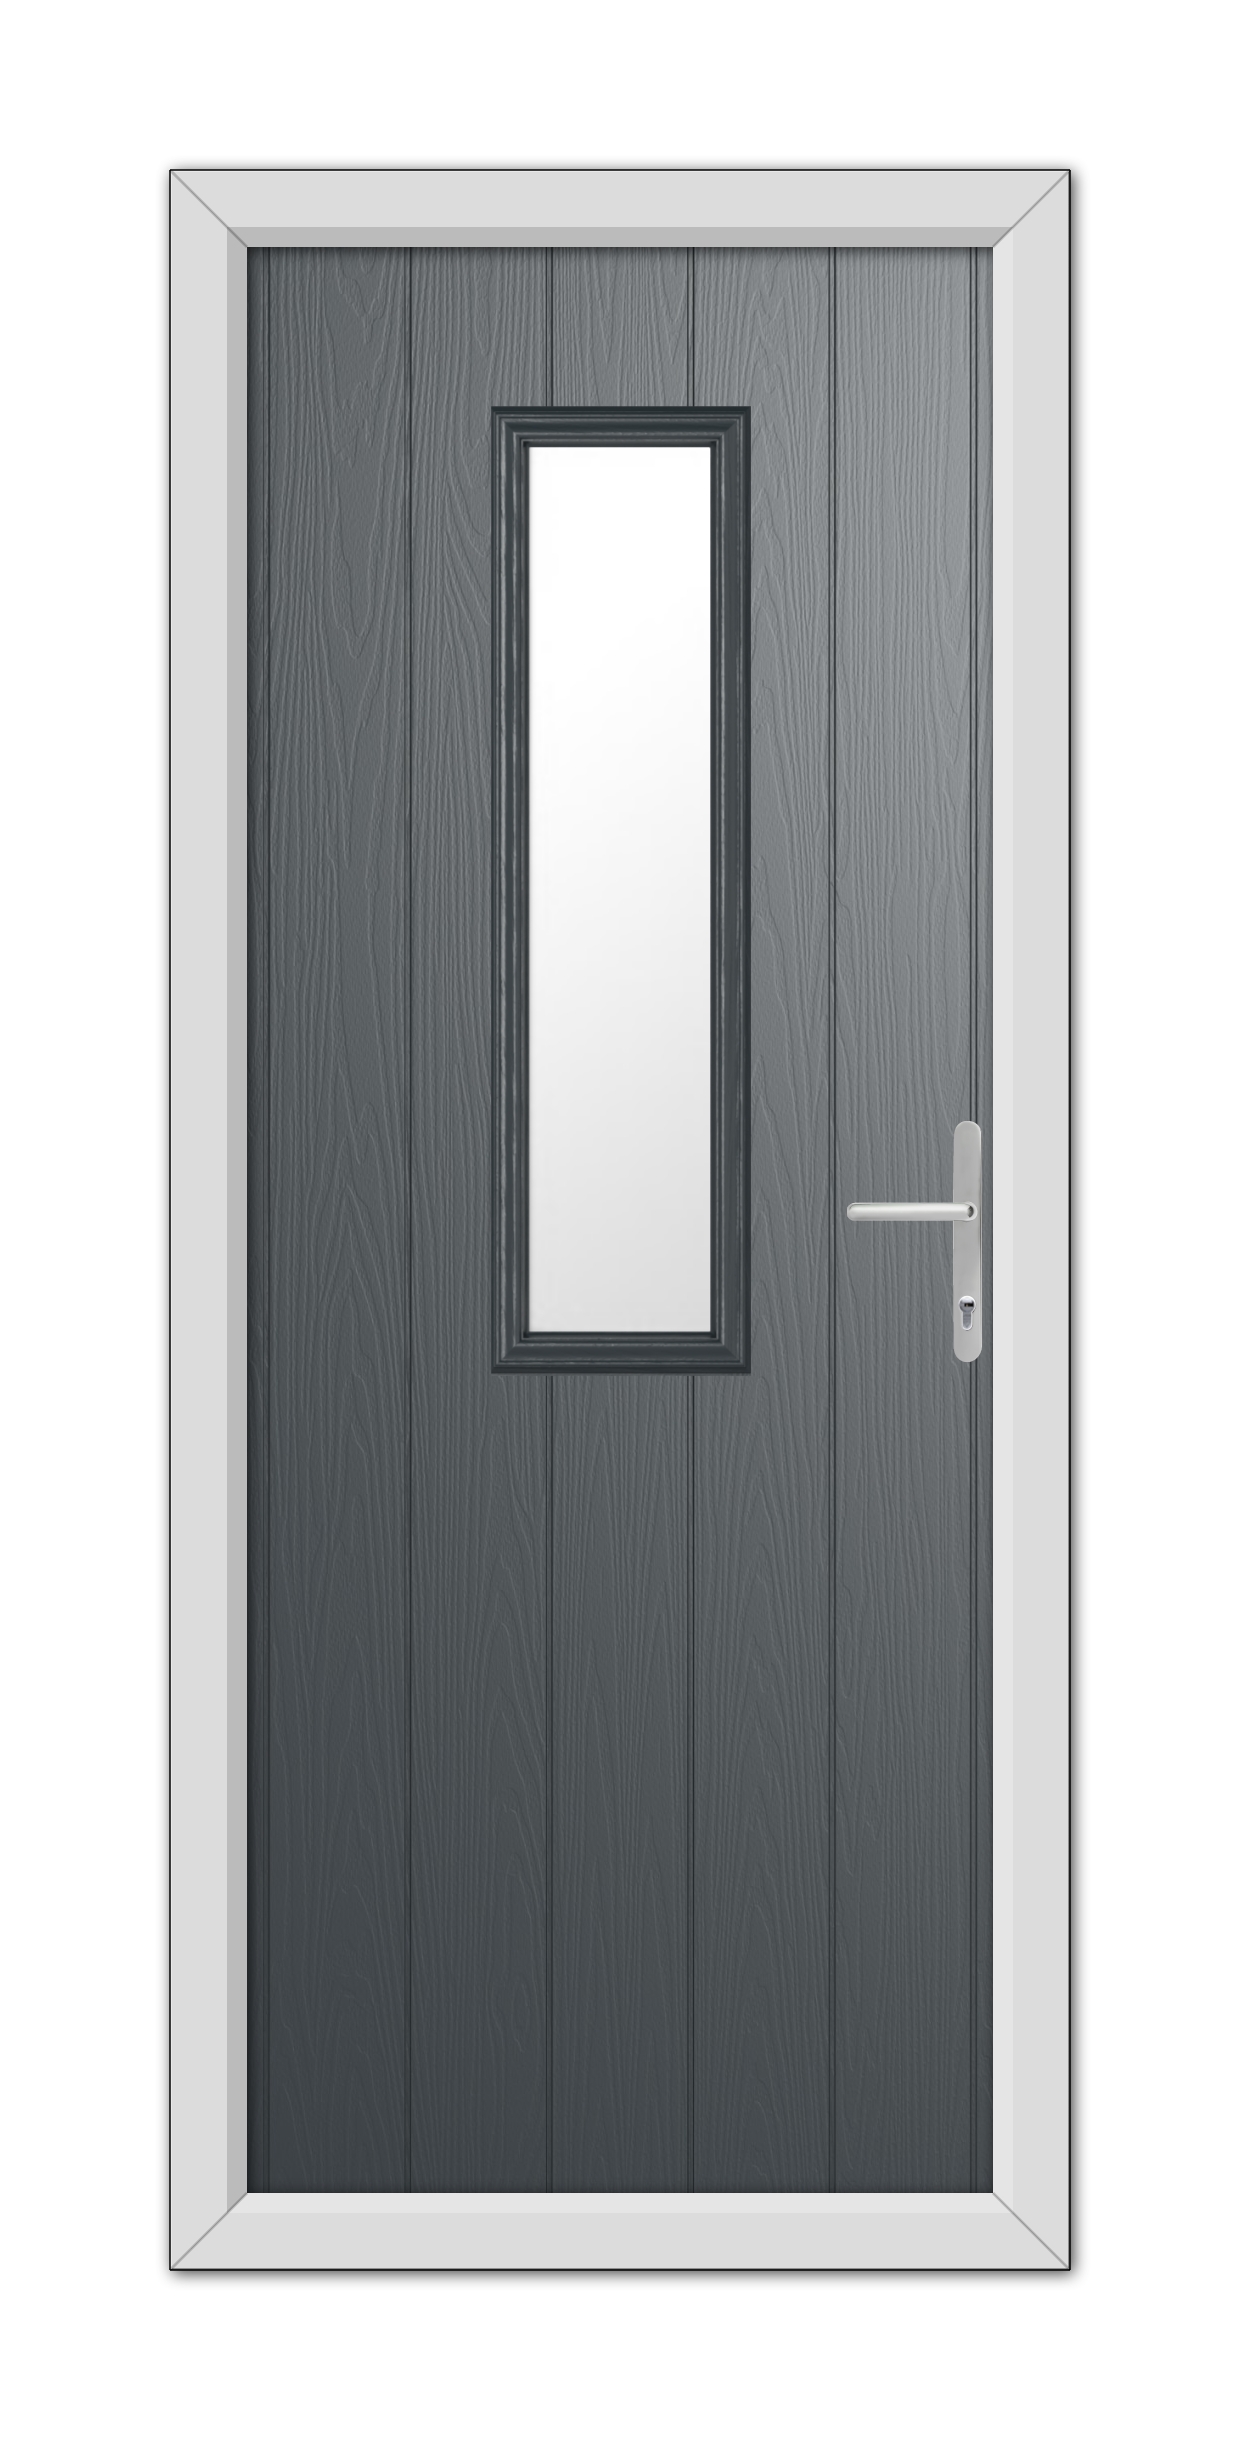 A modern Anthracite Grey Mowbray Composite Door 48mm Timber Core with a vertical rectangular window and a silver handle, set in a white frame.